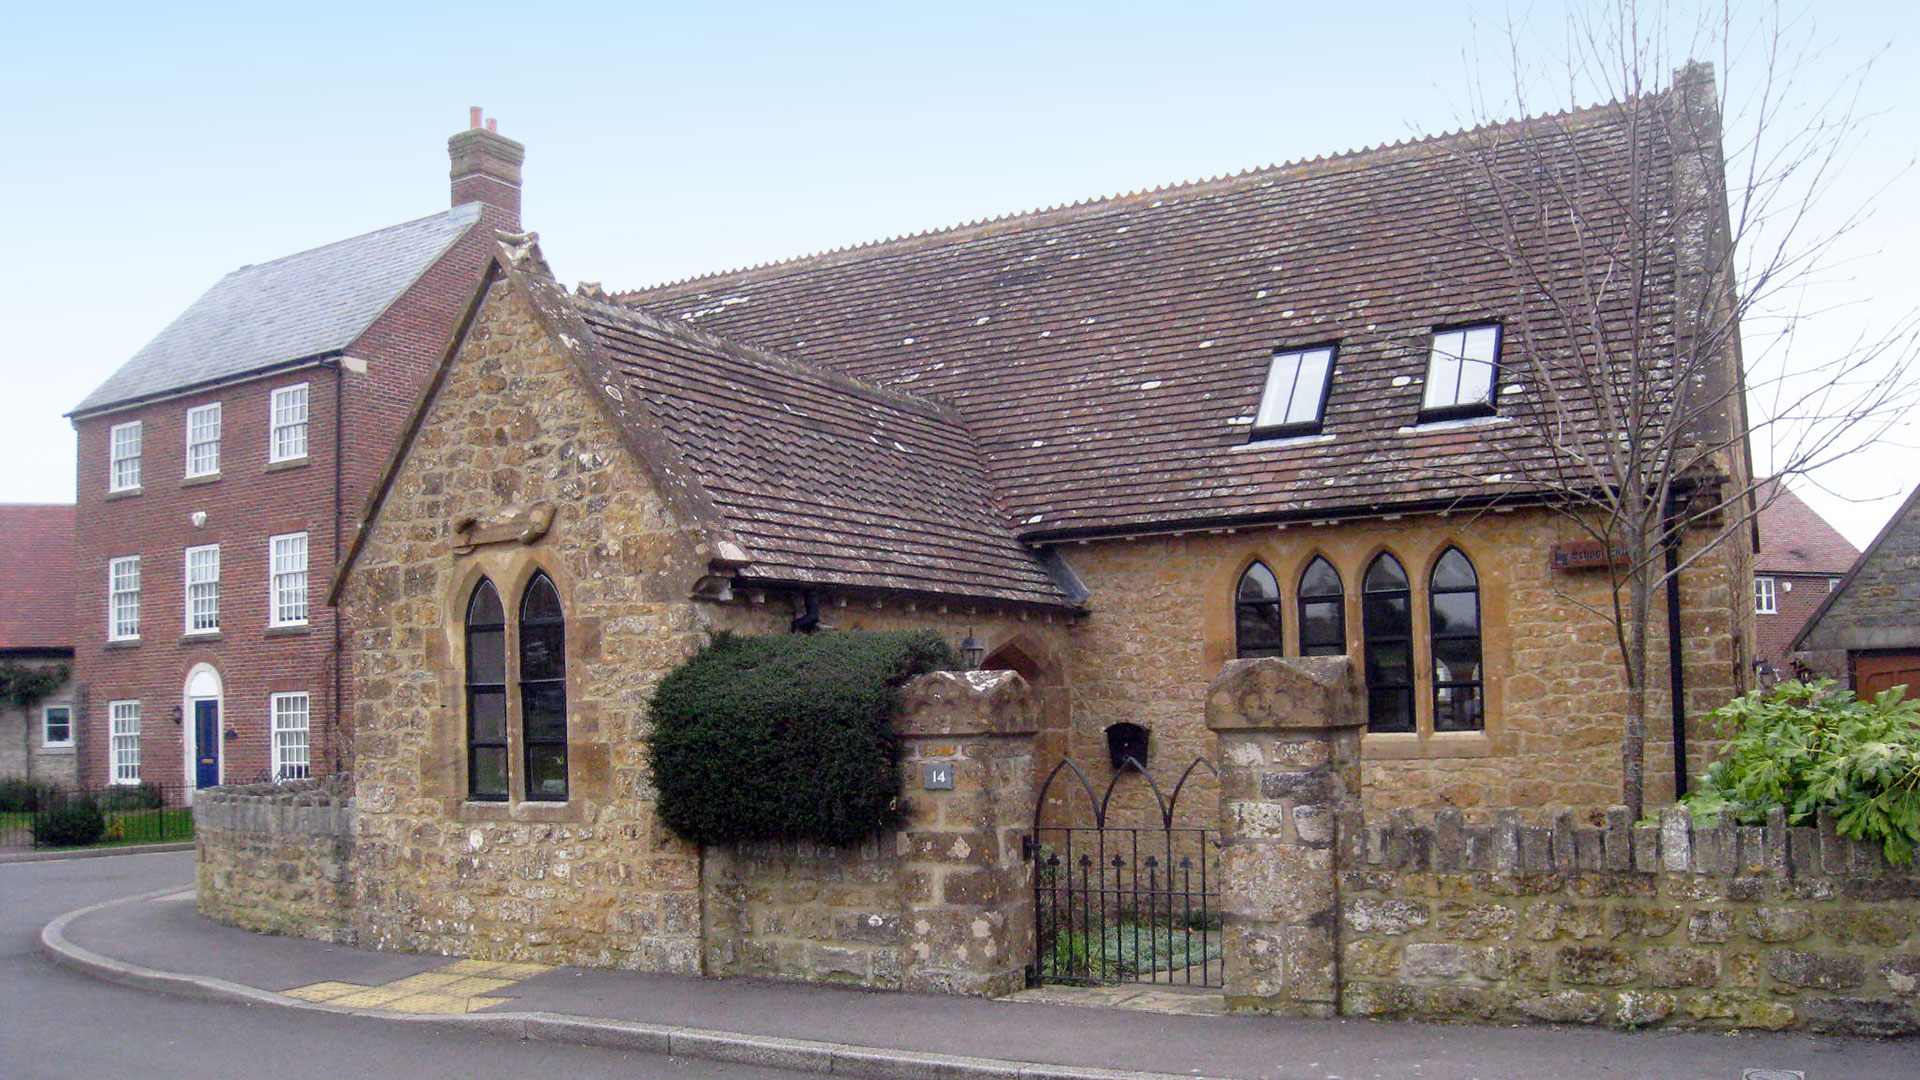 school conversion stone building with skylight roof windows